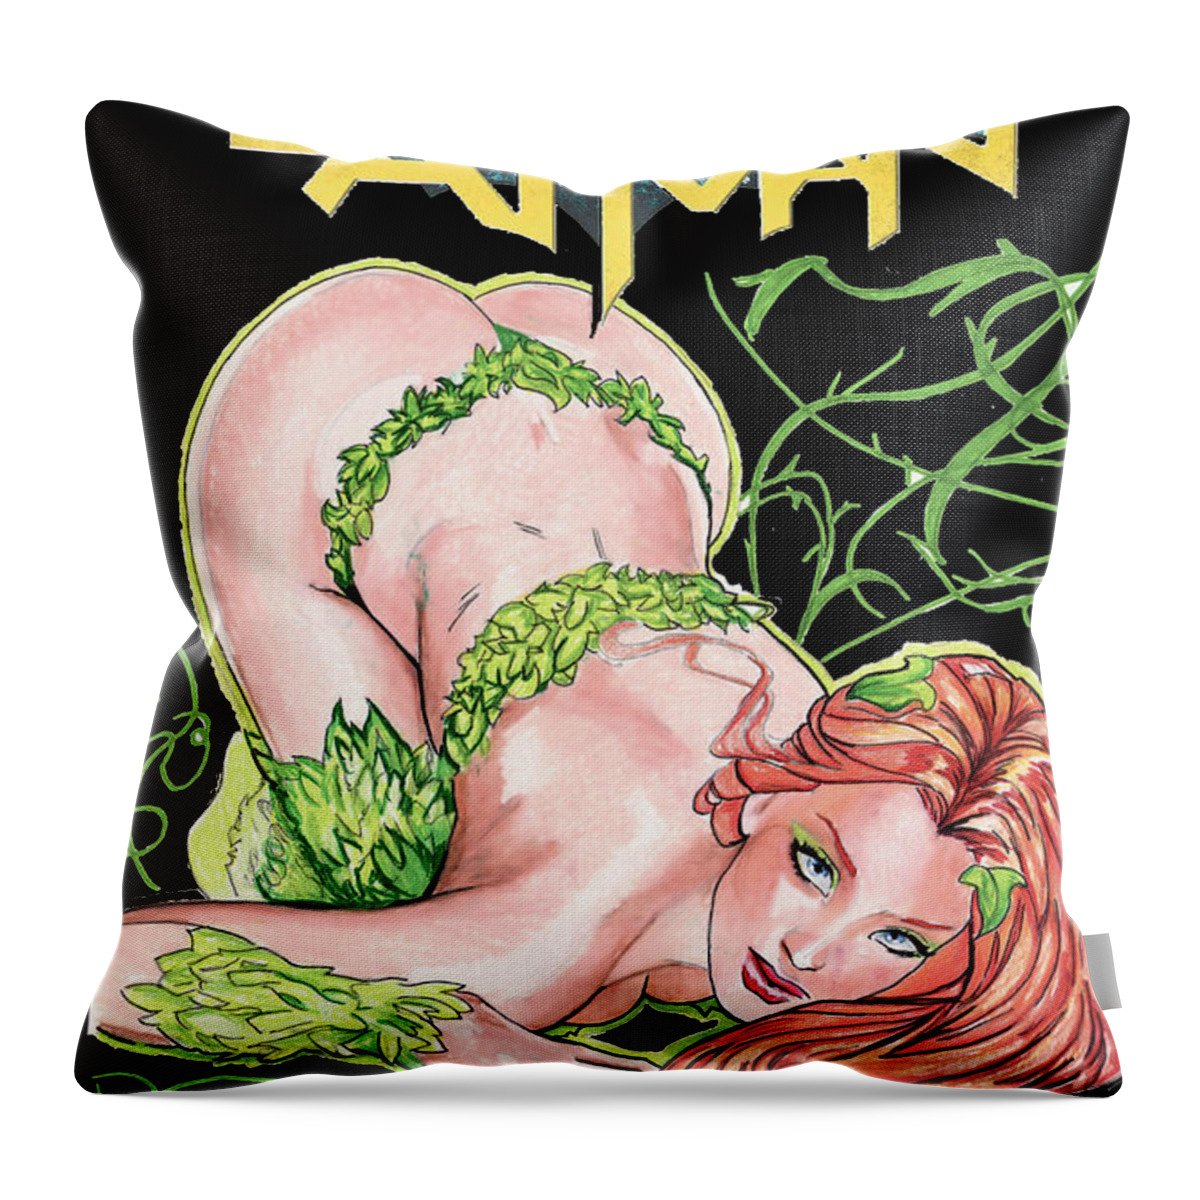 Poison Throw Pillow featuring the drawing Poison Ivy - Batman by Bill Richards